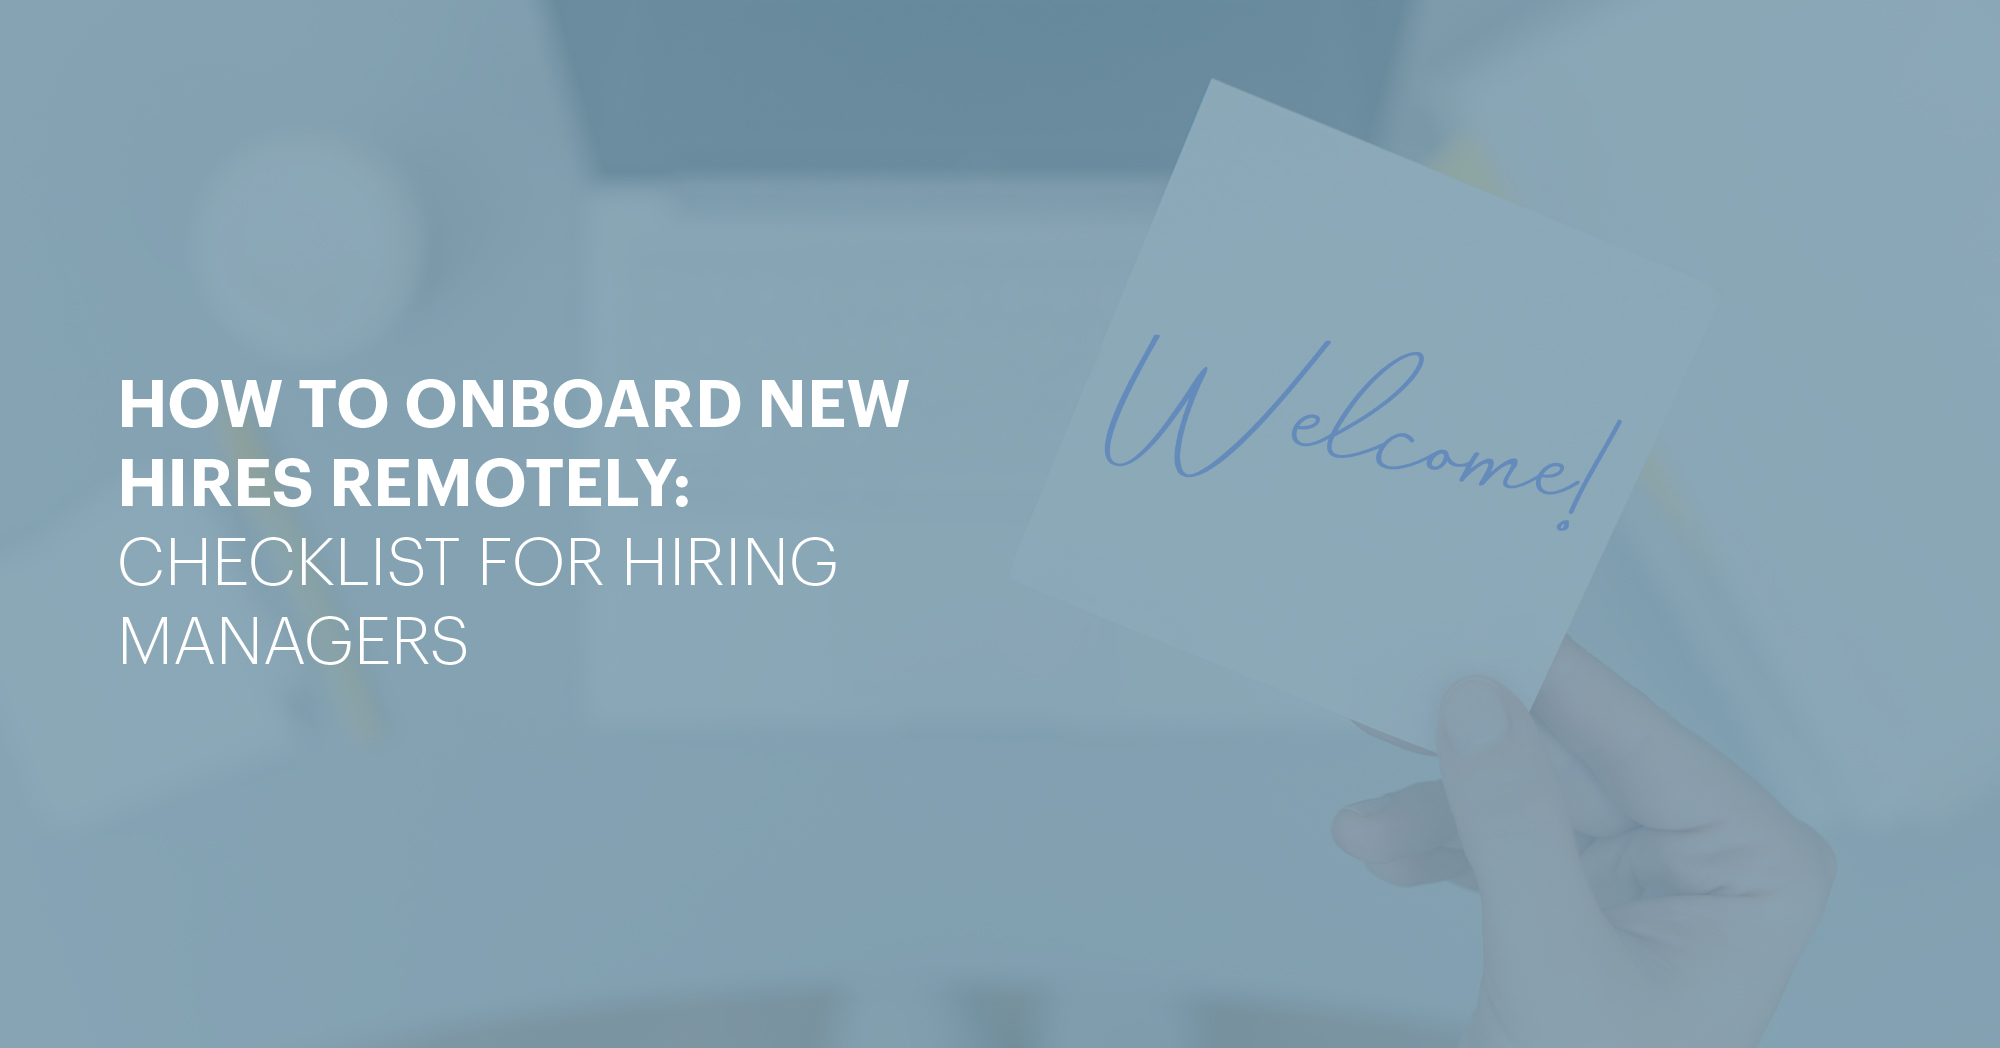 How to onboard new hires remotely: Checklist for hiring managers